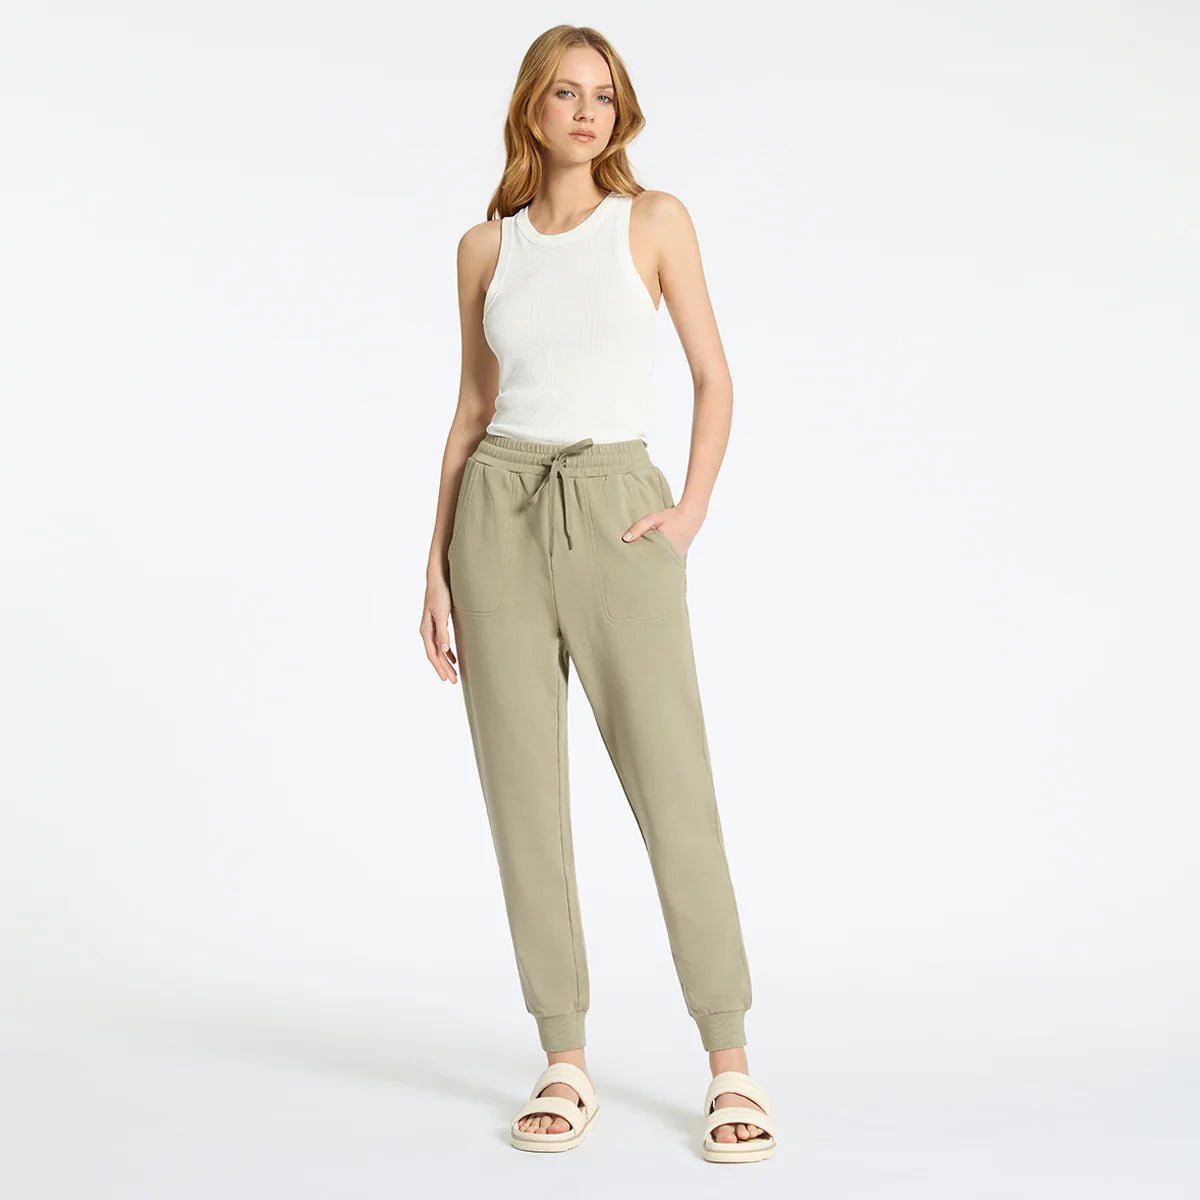 AS YOU WAKE WOMEN’S TRACK PANTS // Washed Sage ~ Status Anxiety ~